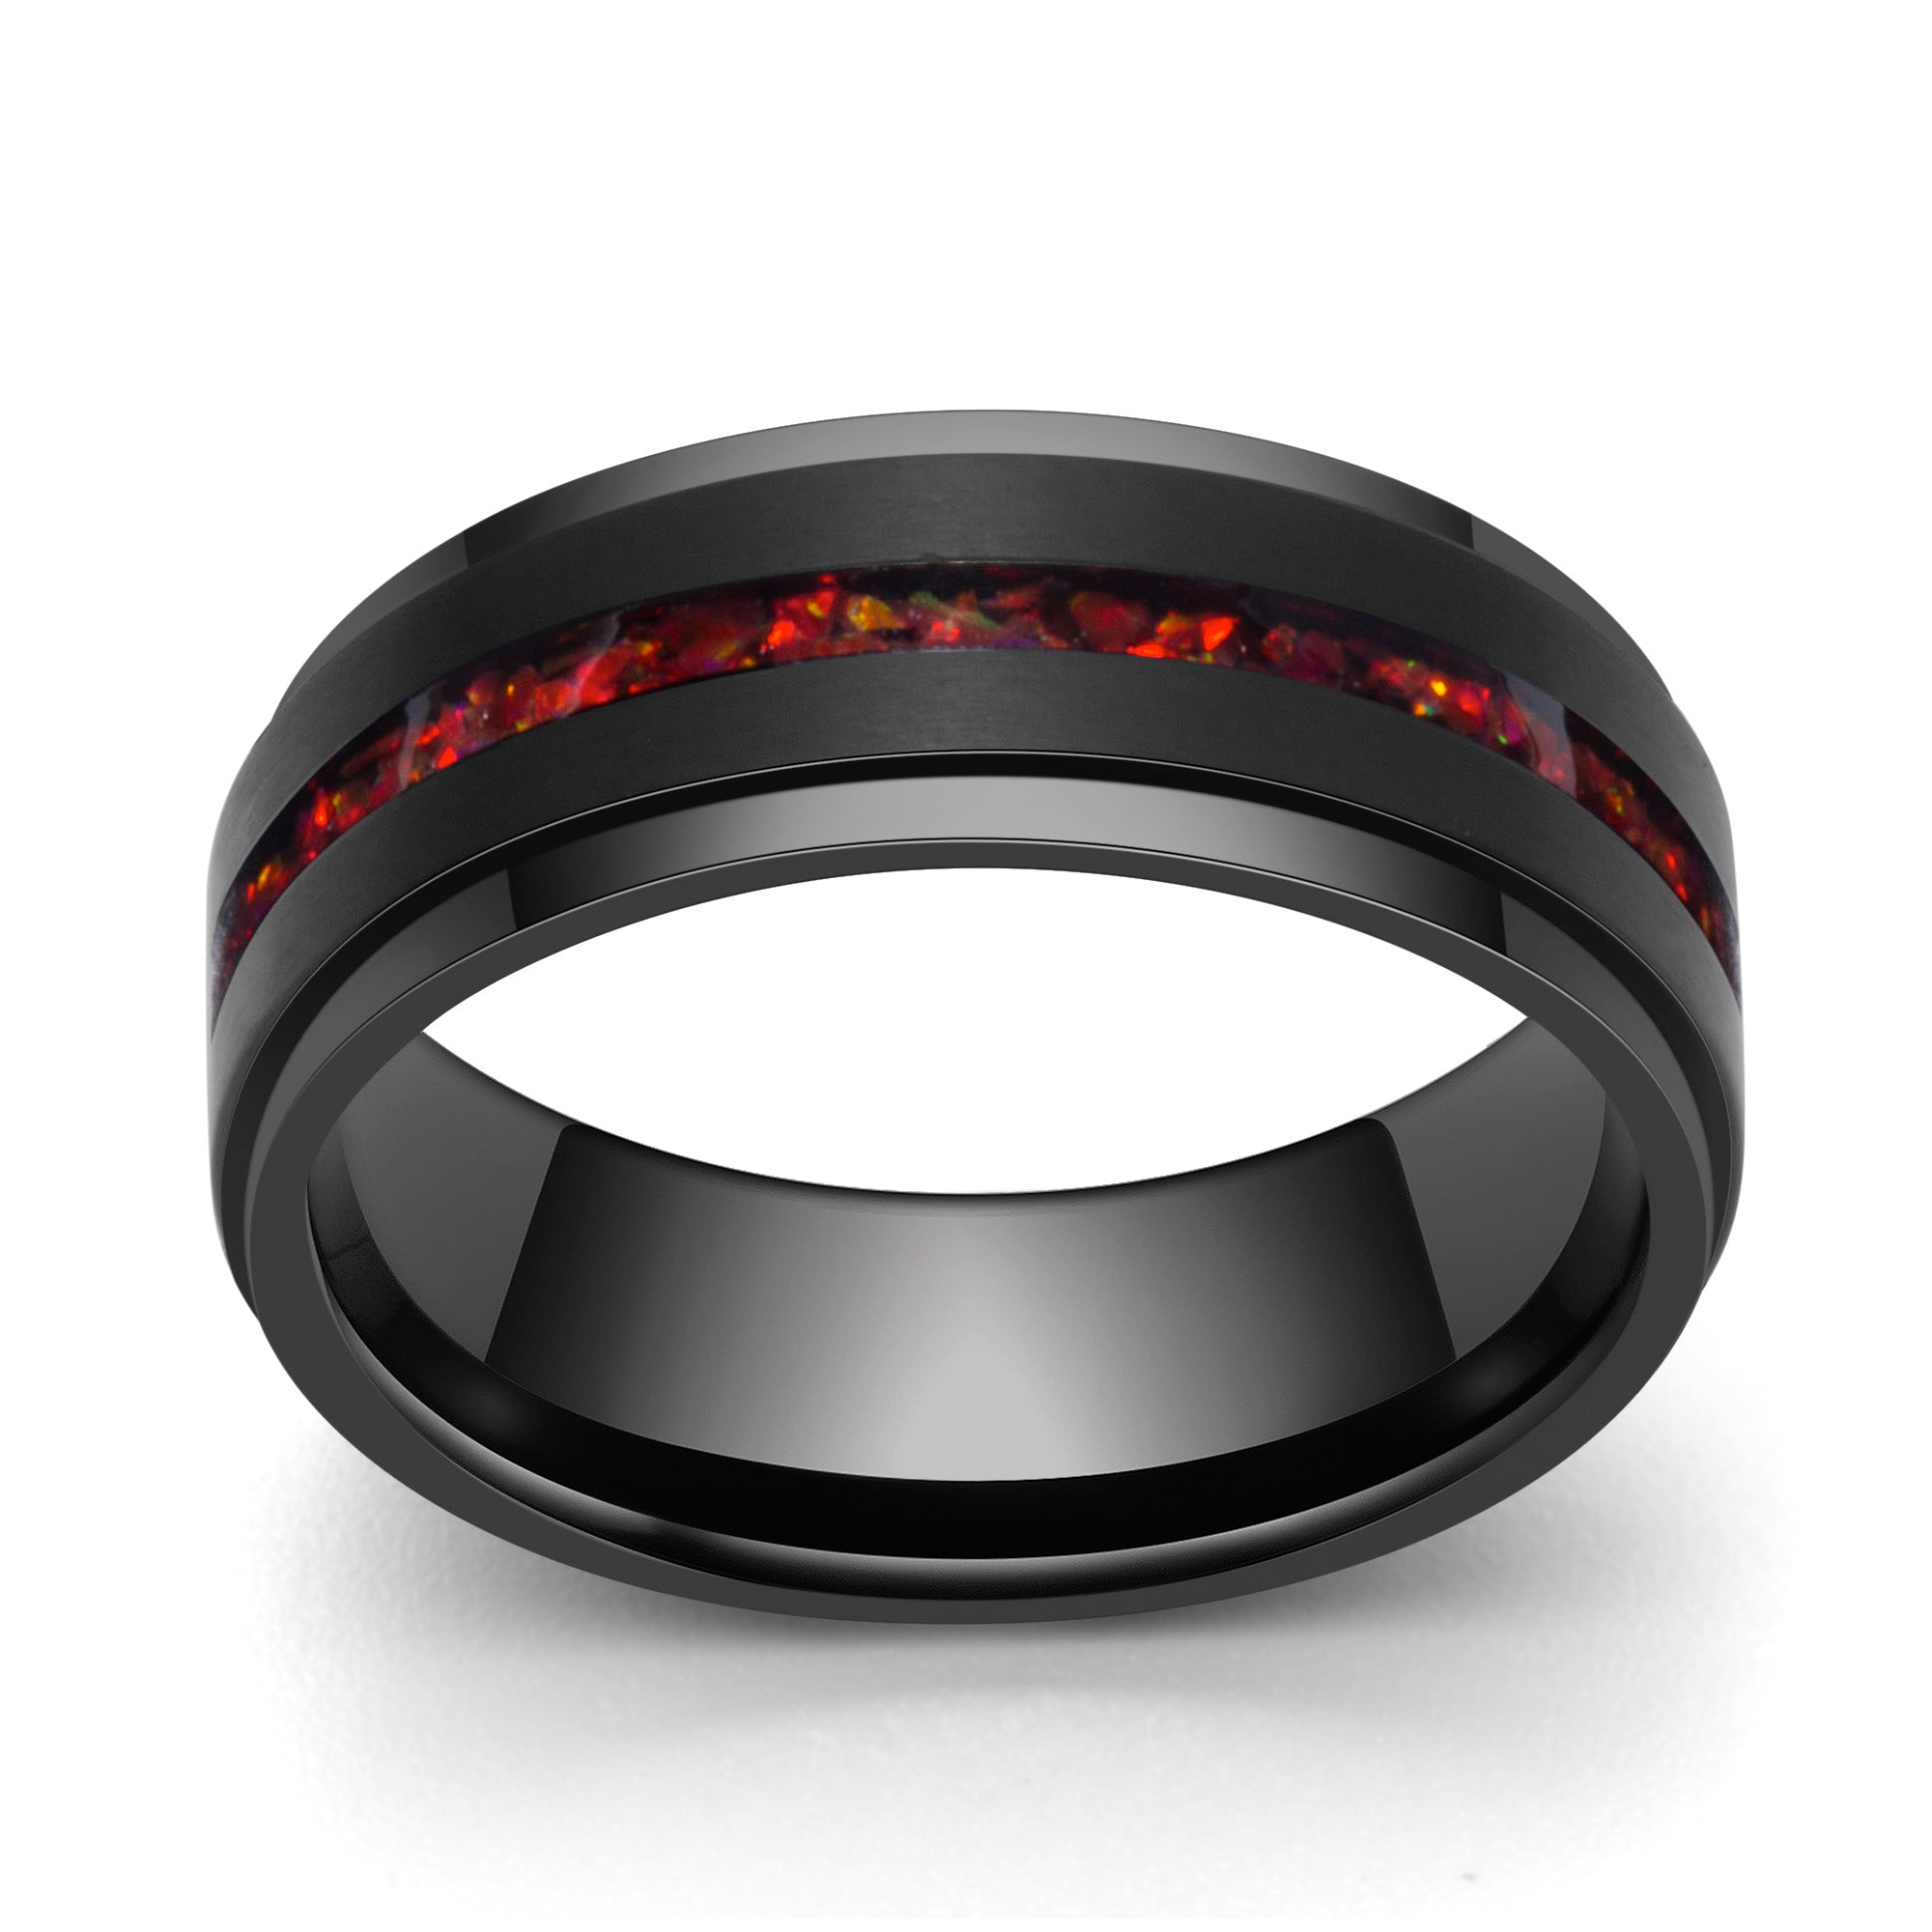 Black Satin Brushed Titanium with Stepped Edge and Red Opal Inlay, 8MM